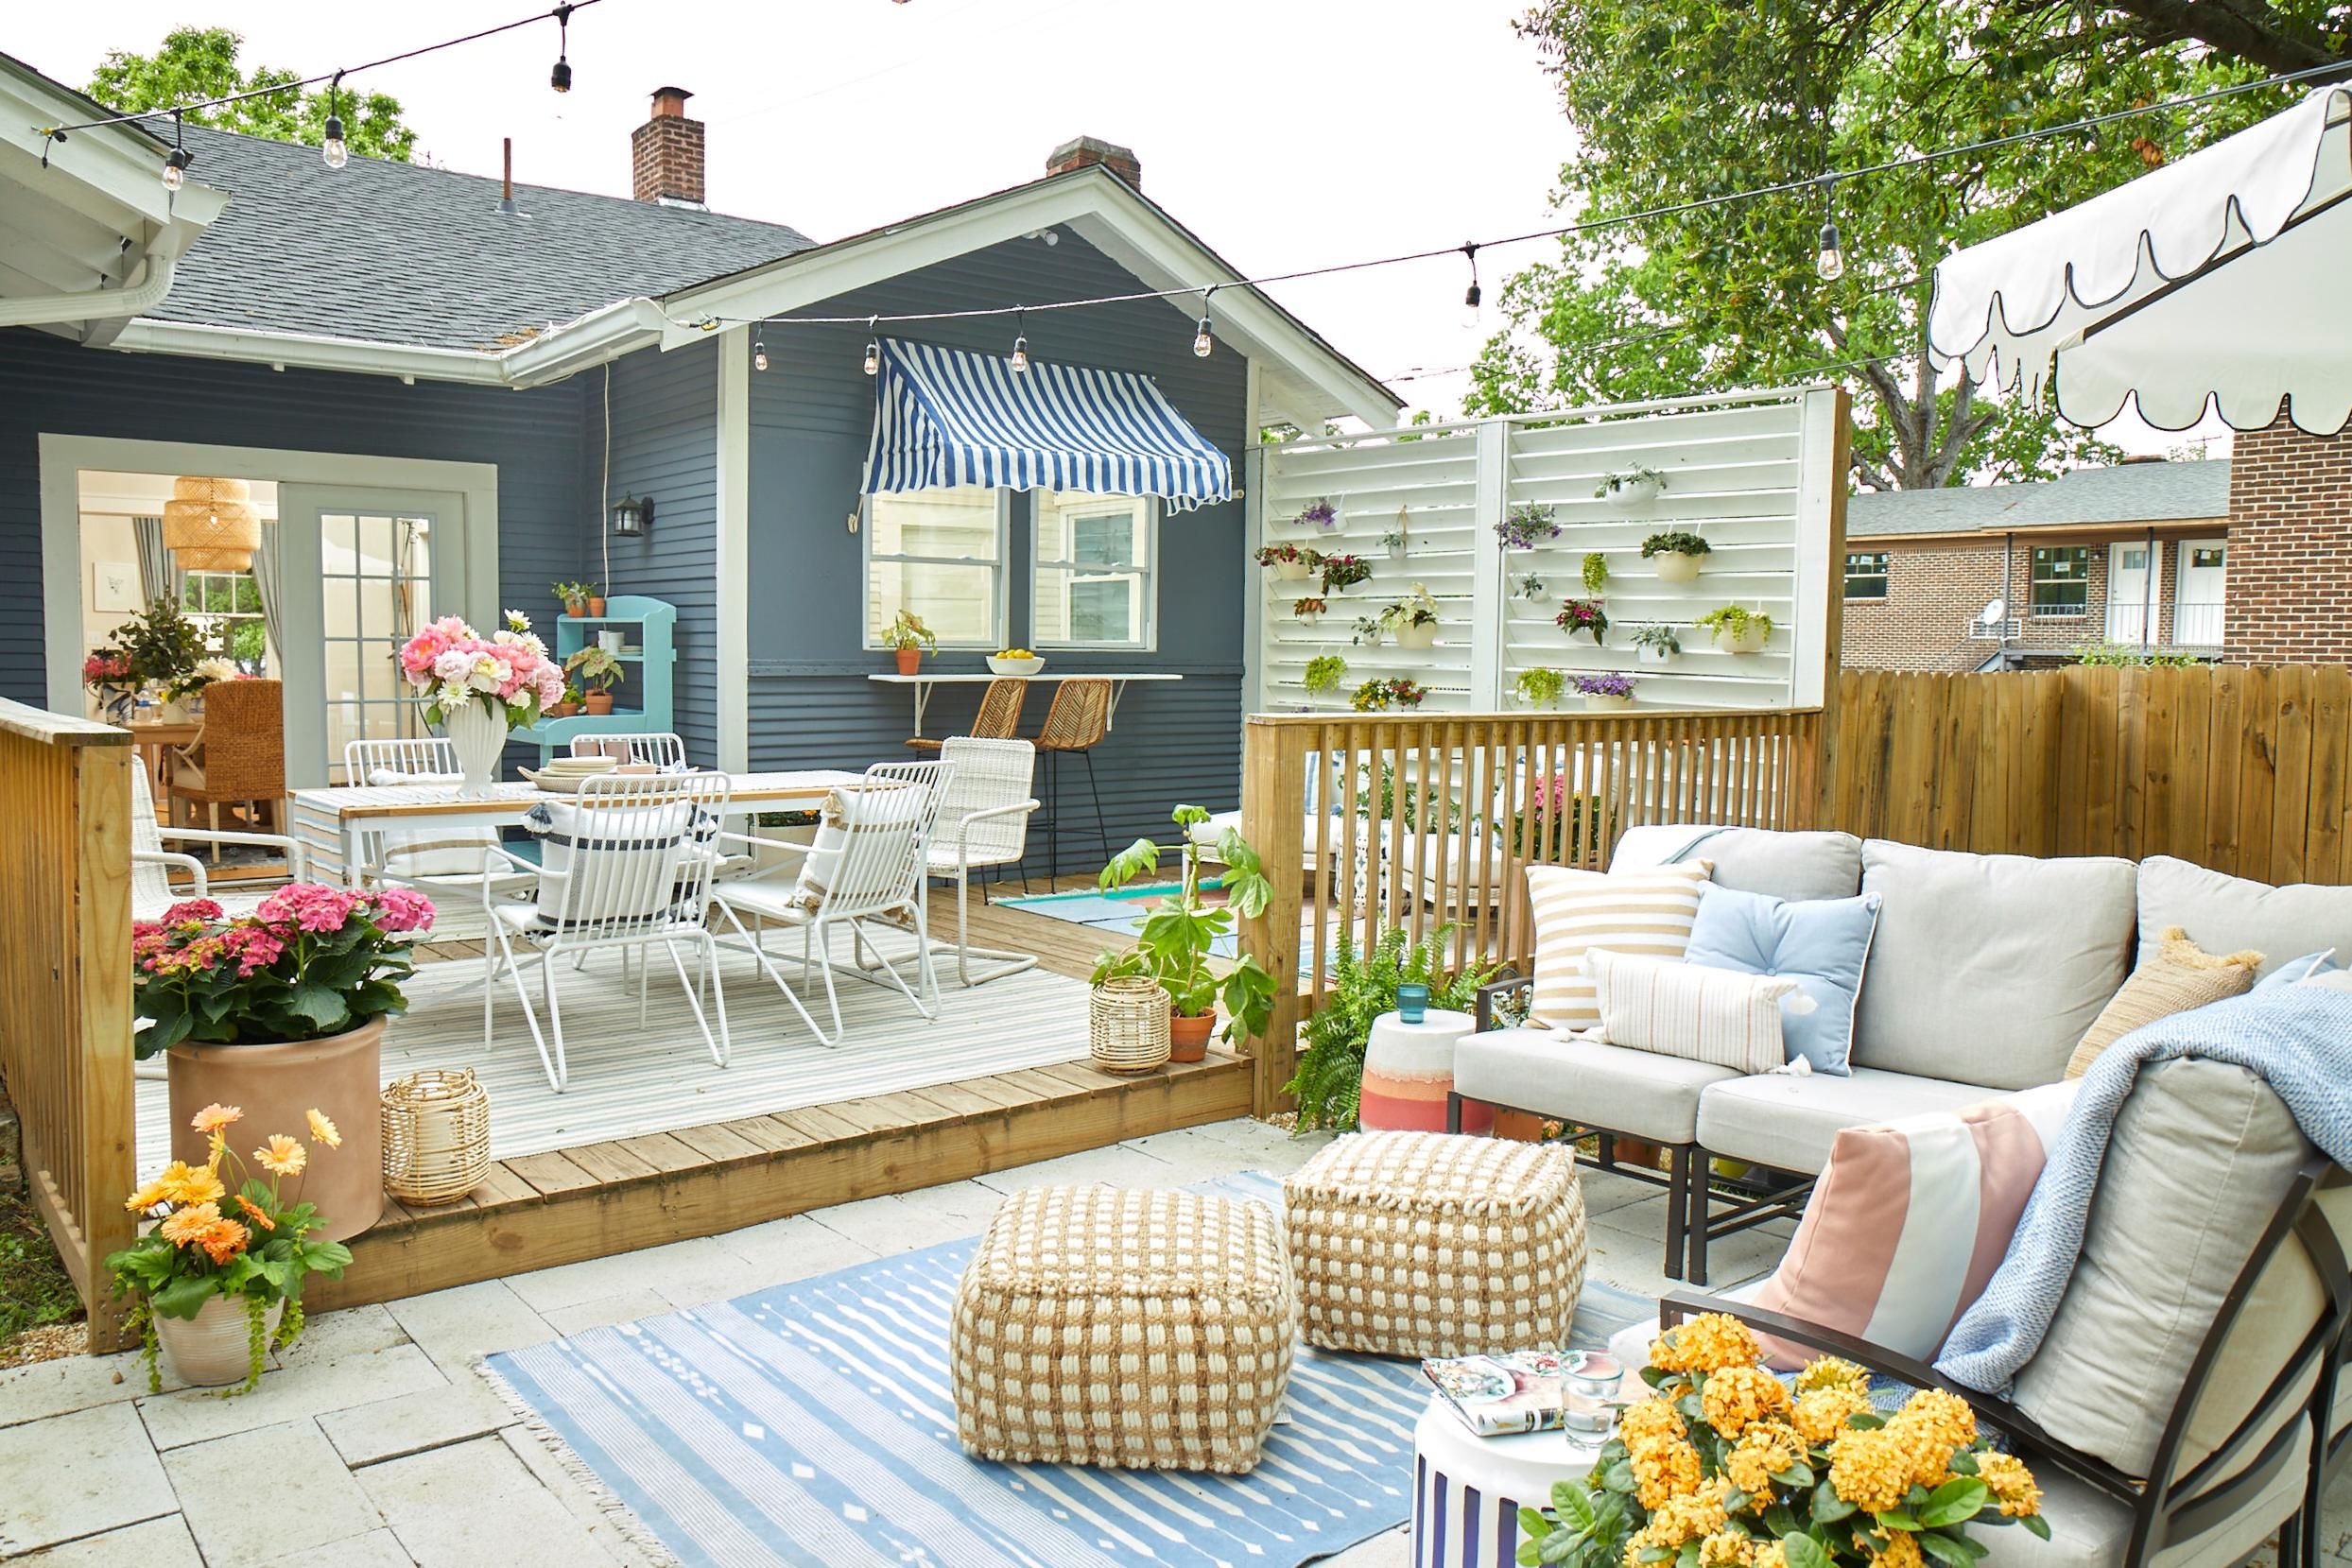 50 Best Patio And Porch Design Ideas Decorating Your Outdoor Space - Porch Furniture Ideas Uk